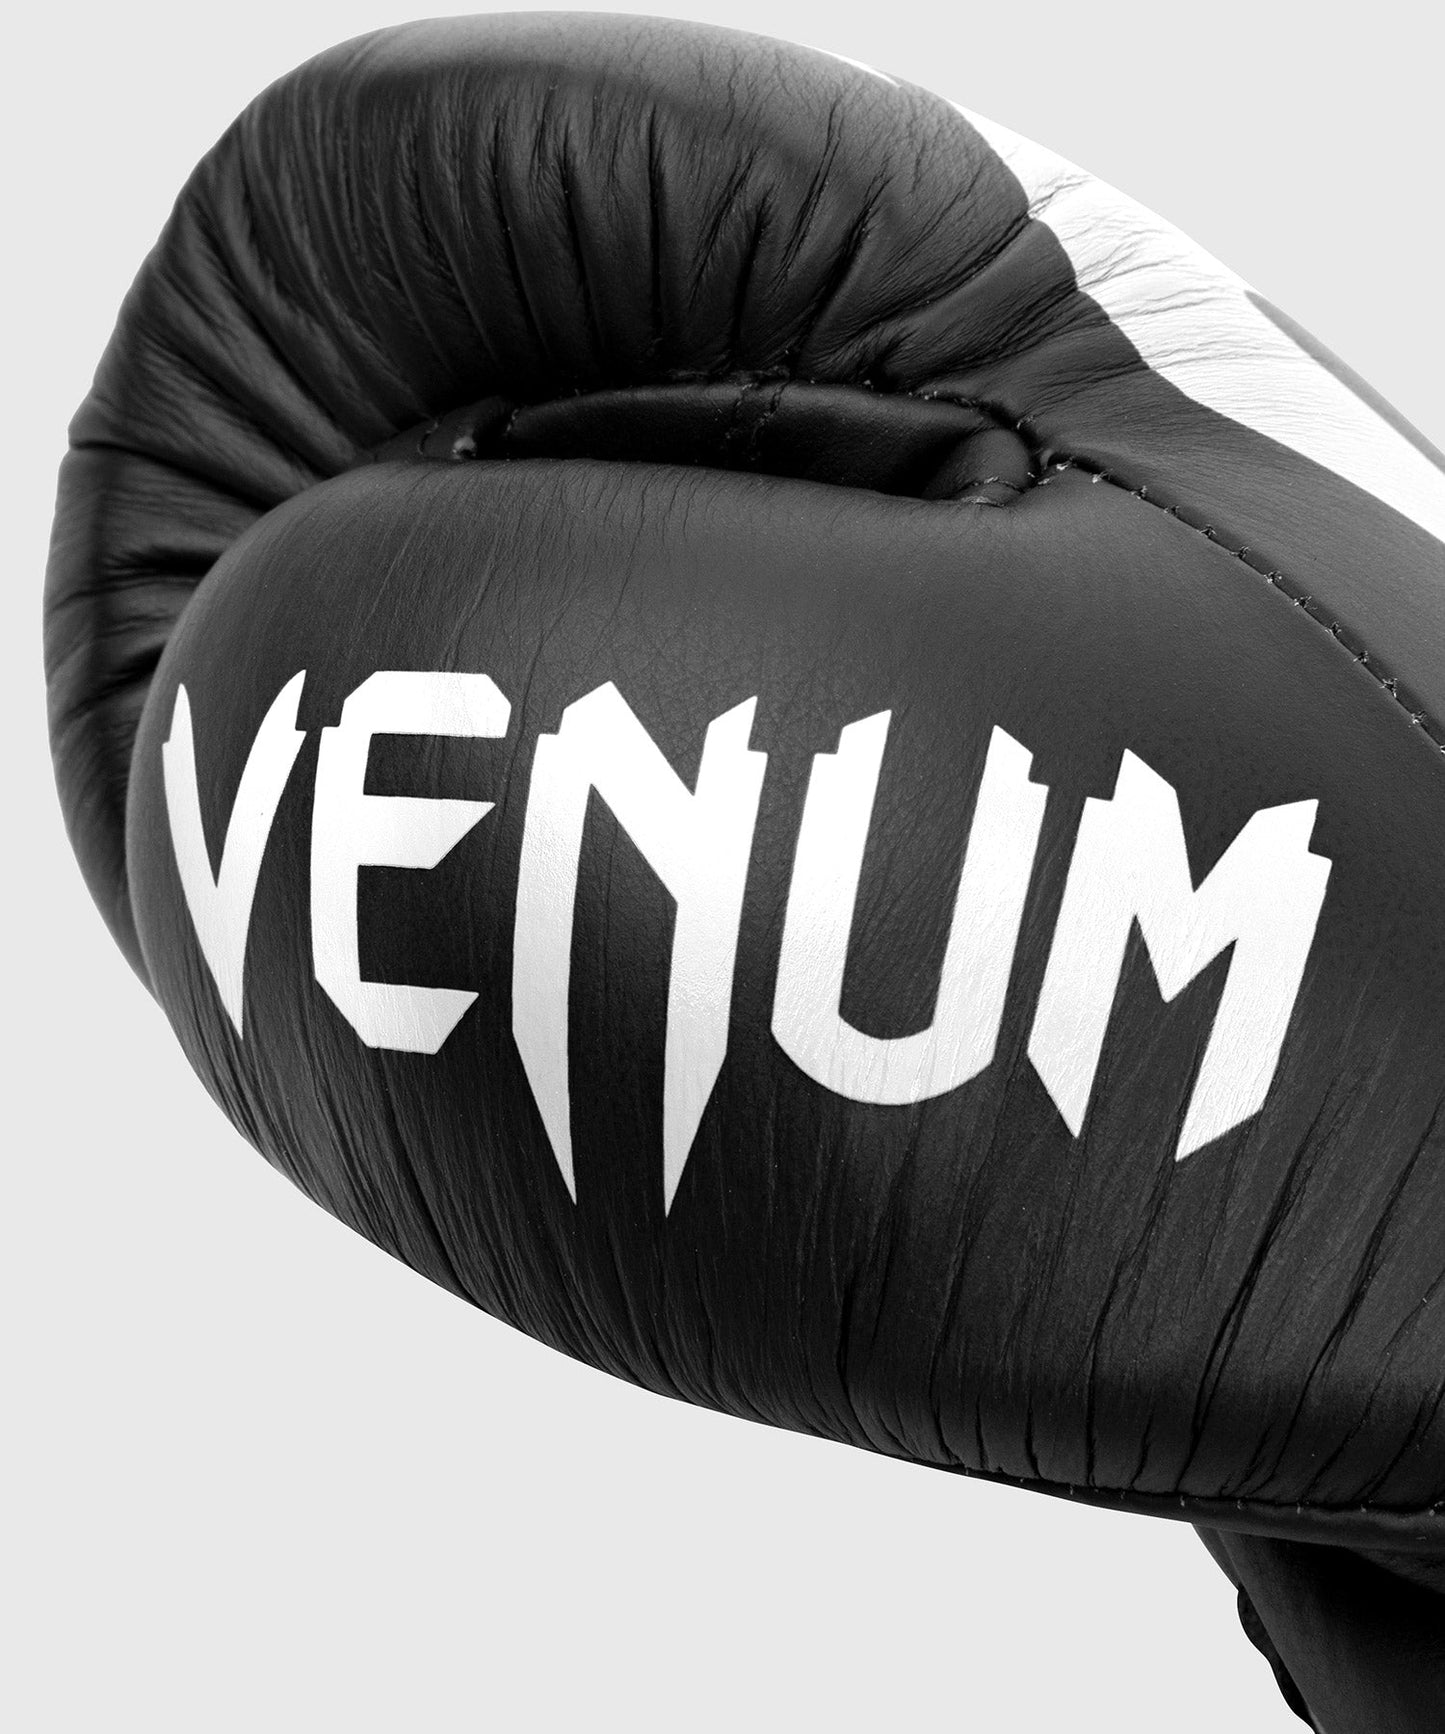 Venum Giant 2.0 Pro Boxing Gloves - With Laces - Black/White